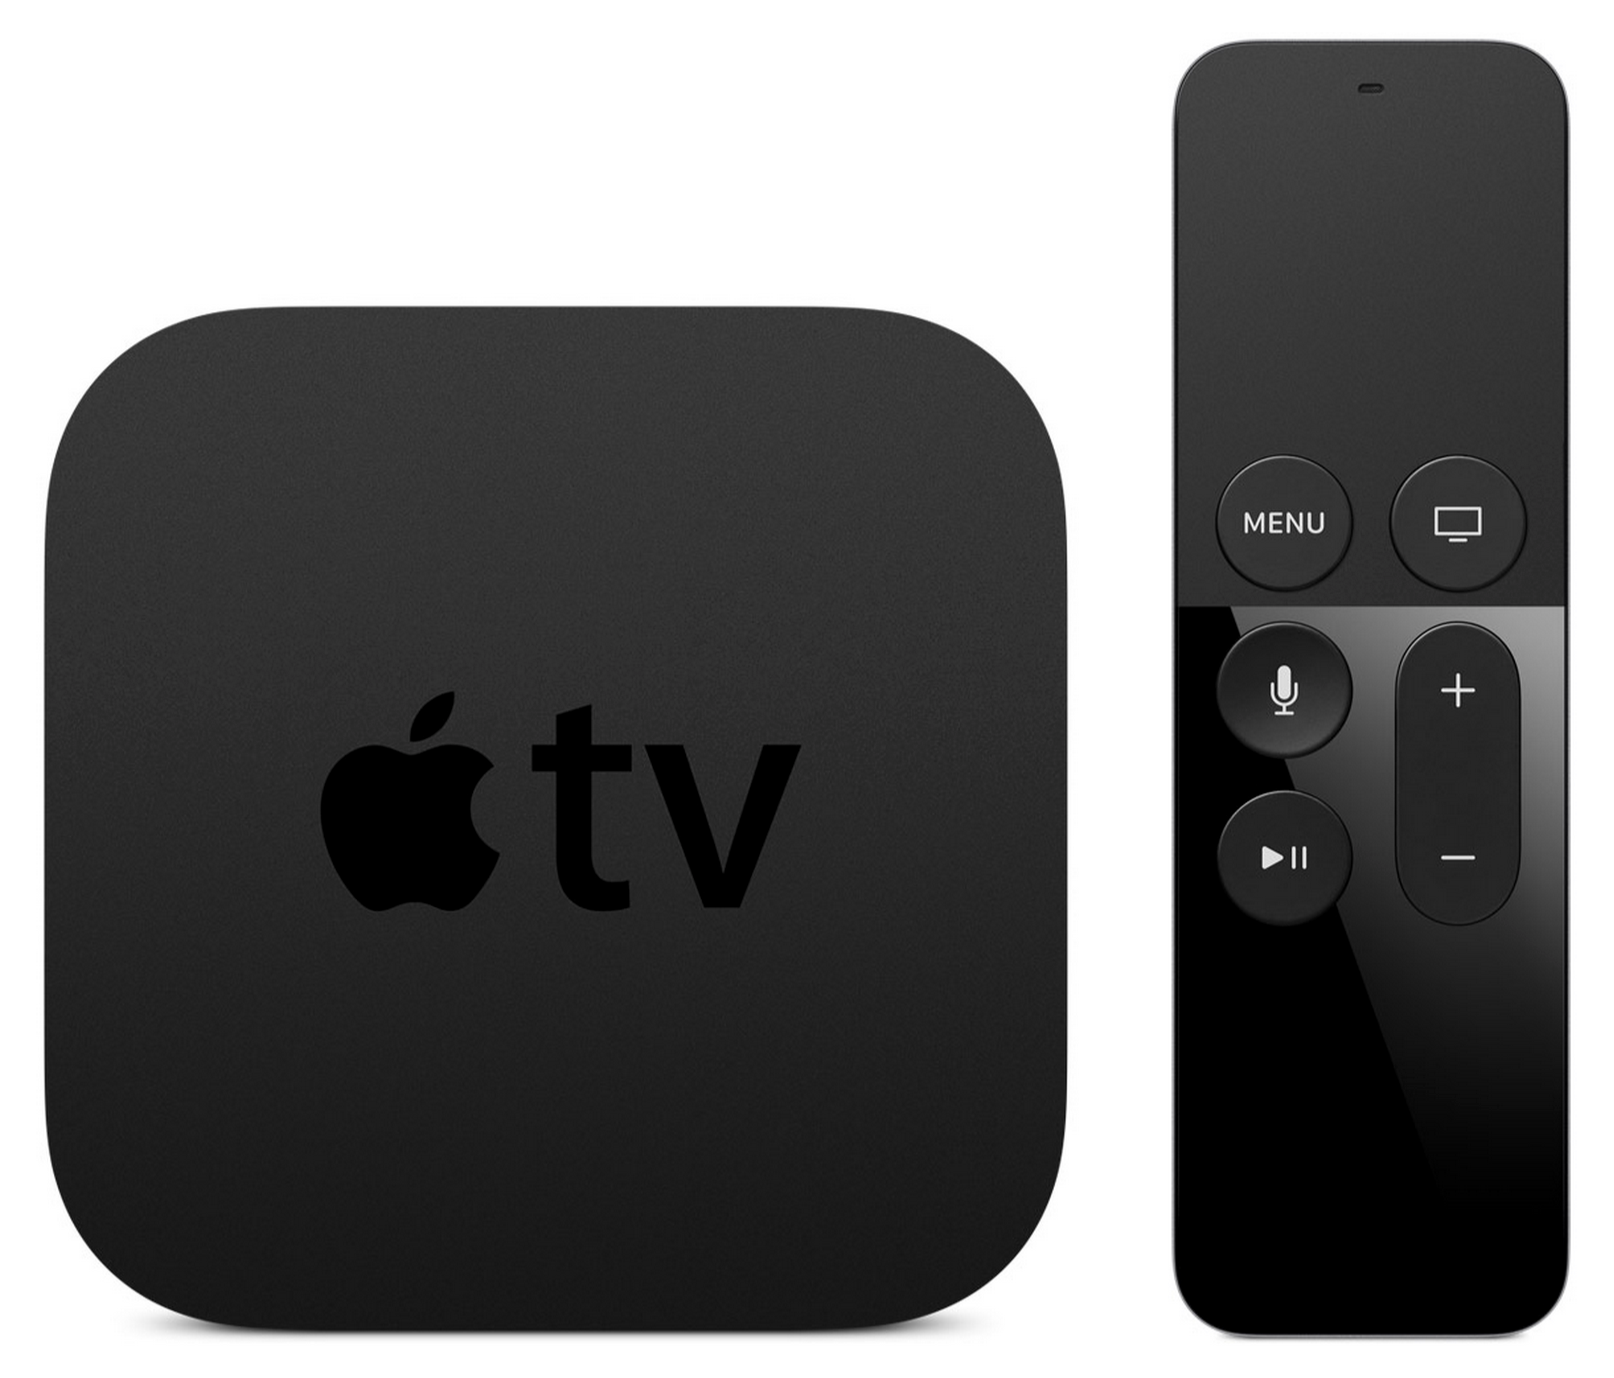 Will The New Apple TV Let You Call Local Businesses?